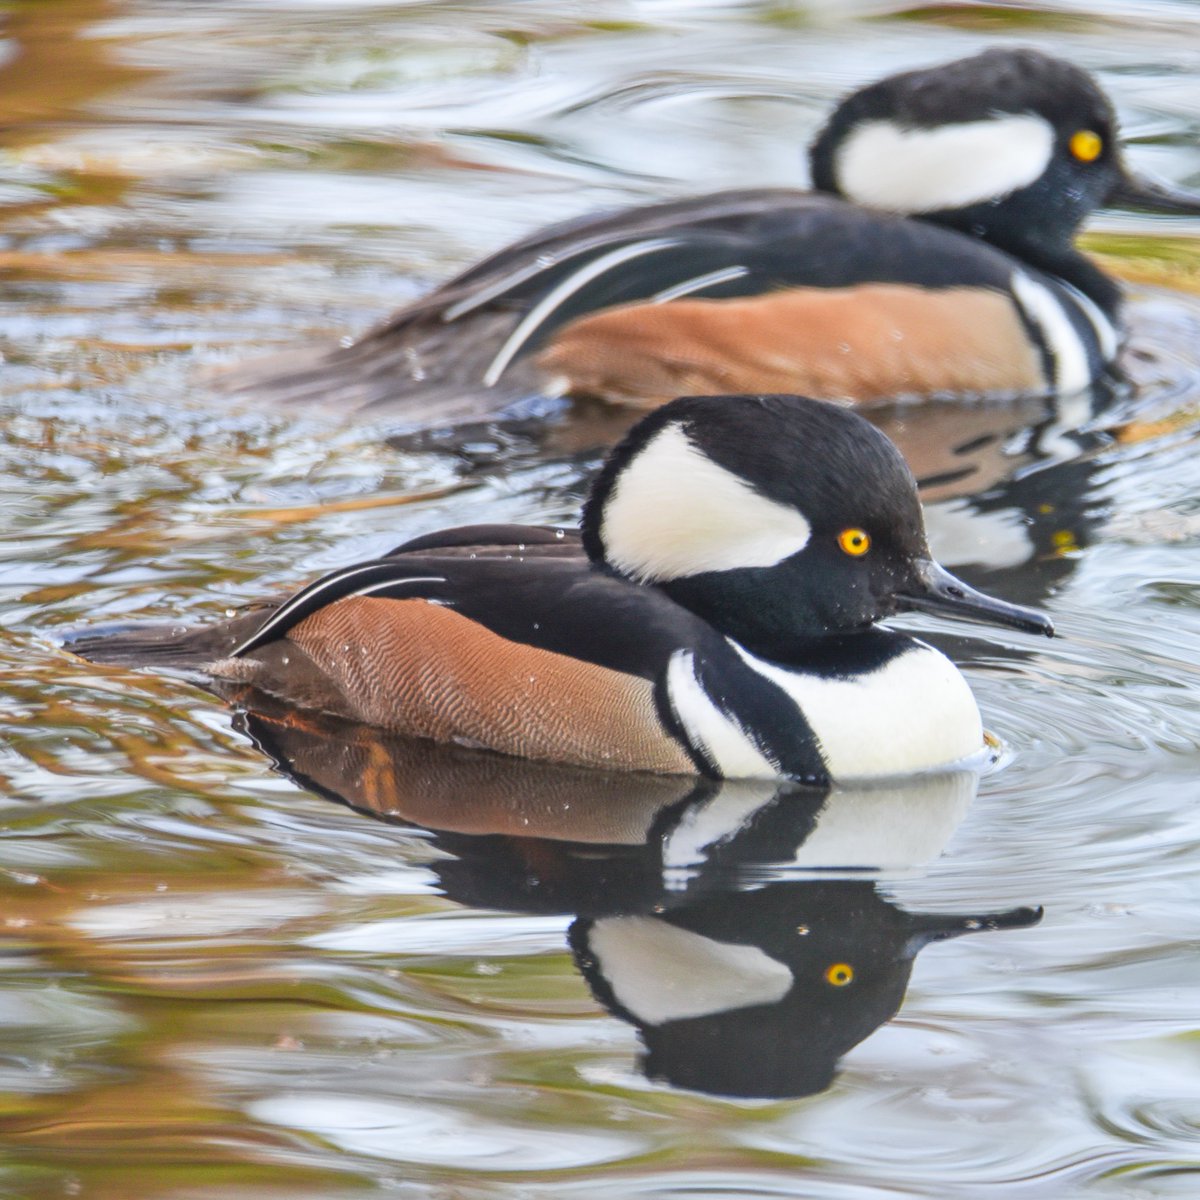 Hooded Merganser's Drake and Chad are out on the Pond being Wild and Crazy Guys.  #Hoodedmergansers #hoodedmerganser #hoodedmergansersoftwitter #waterbird #waterfowl #ducks #duck #ducksoftwitter #birds #BirdsSeenIn2022